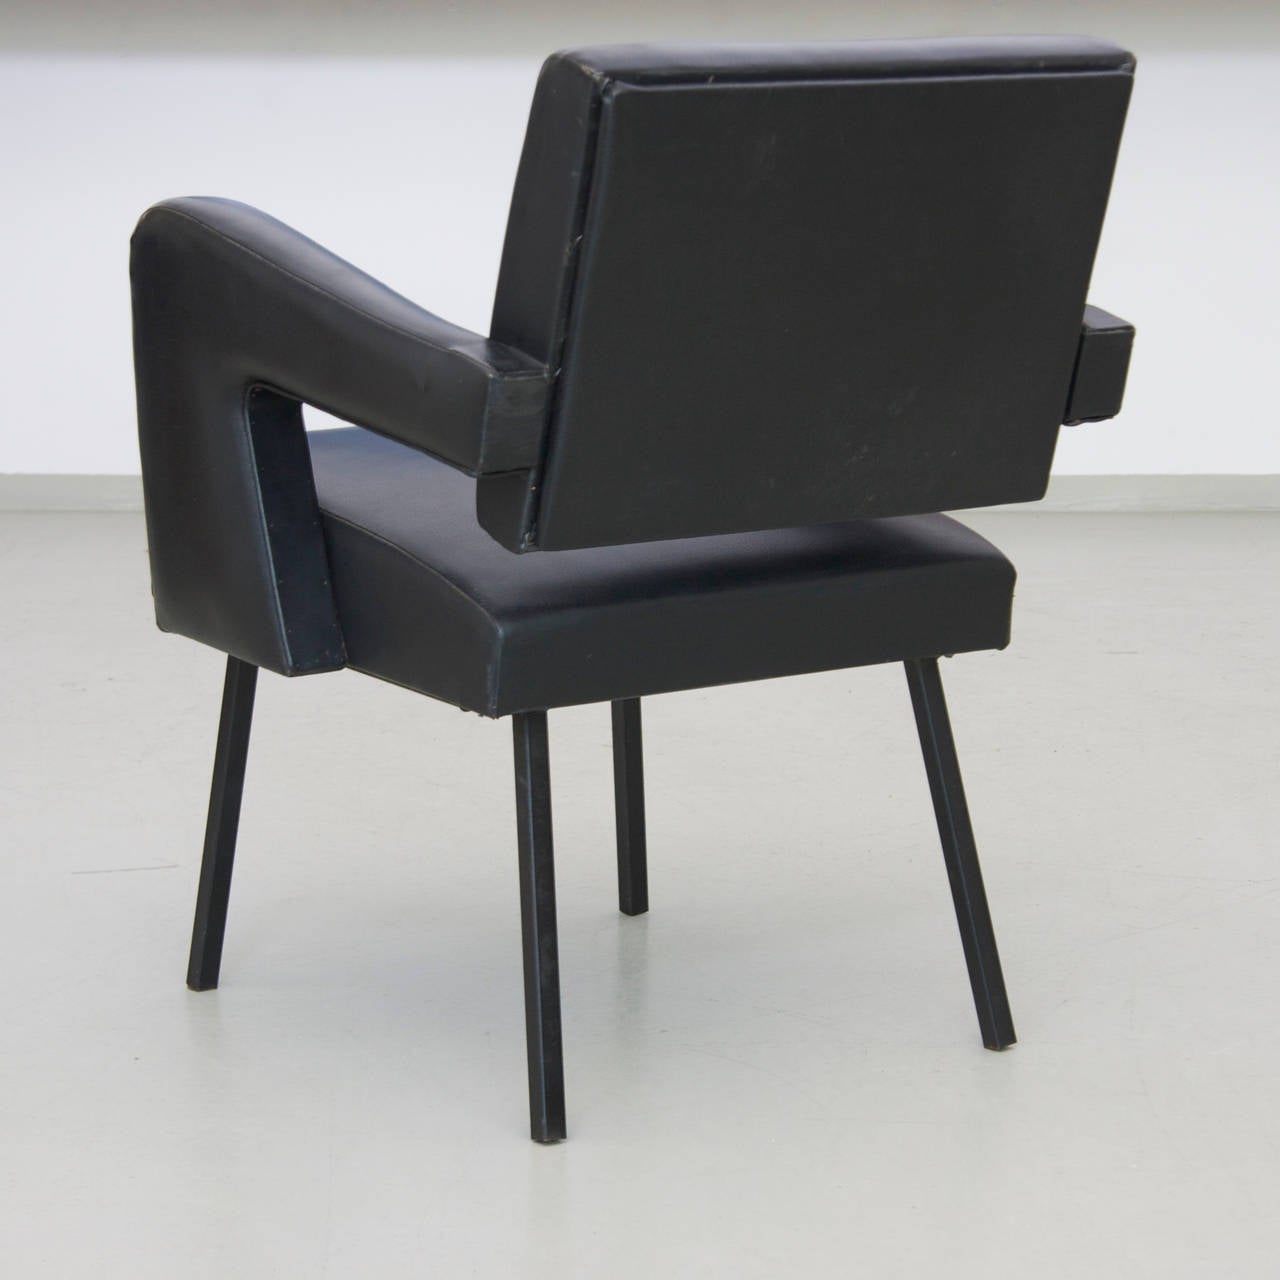 Mid-Century Modern Jacques Adnet Armchair in Black Vinyl Original Condition For Sale